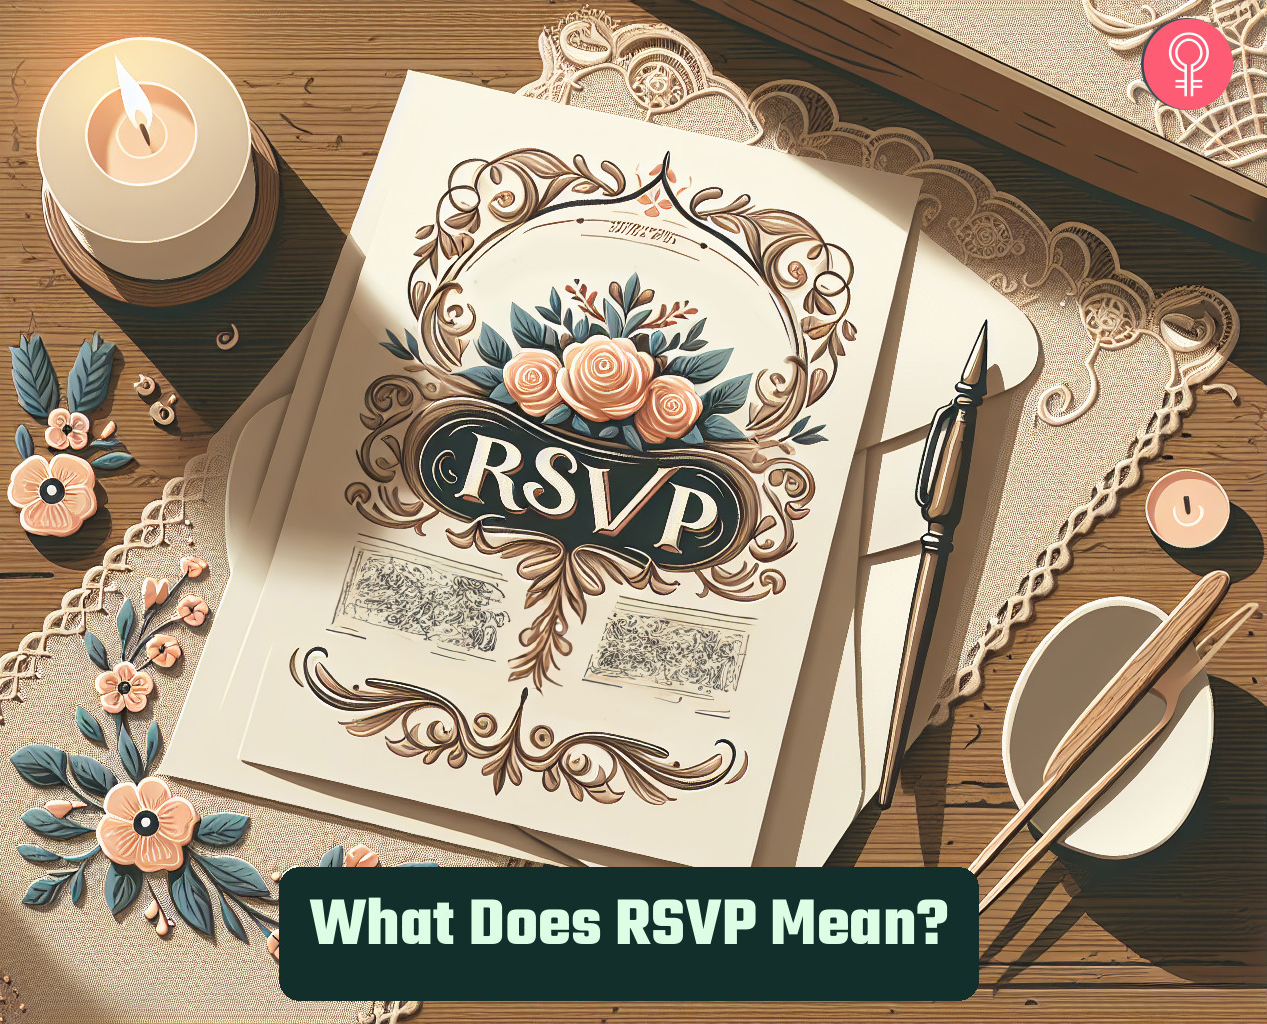 What Does RSVP Mean?